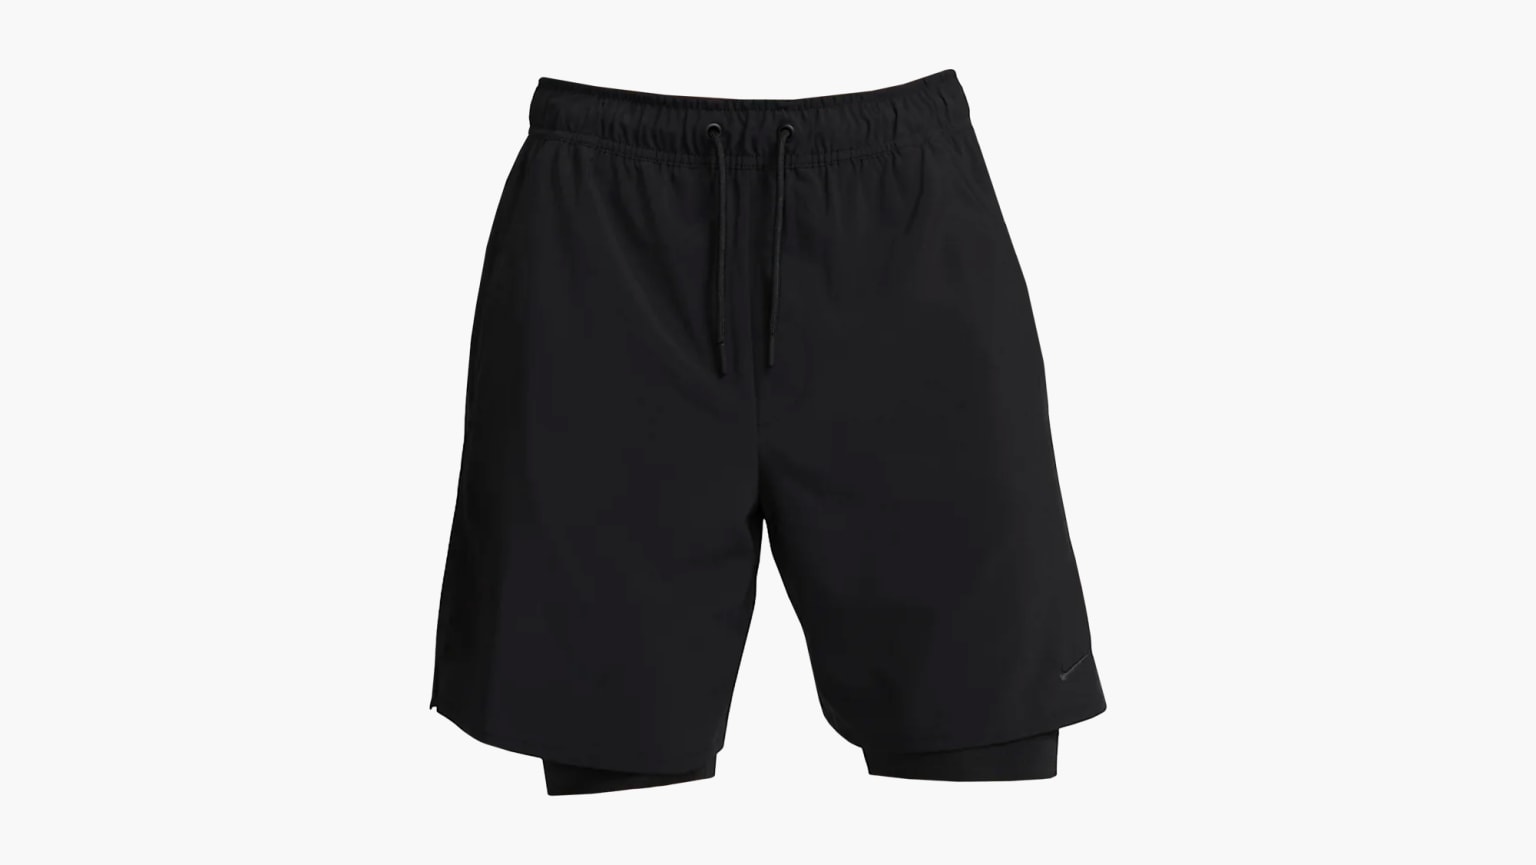 Nike Dri-FIT Solid Small Label Breathable Quick Dry Running Training Shorts  Black 'Multi-Color' - DM4760-010